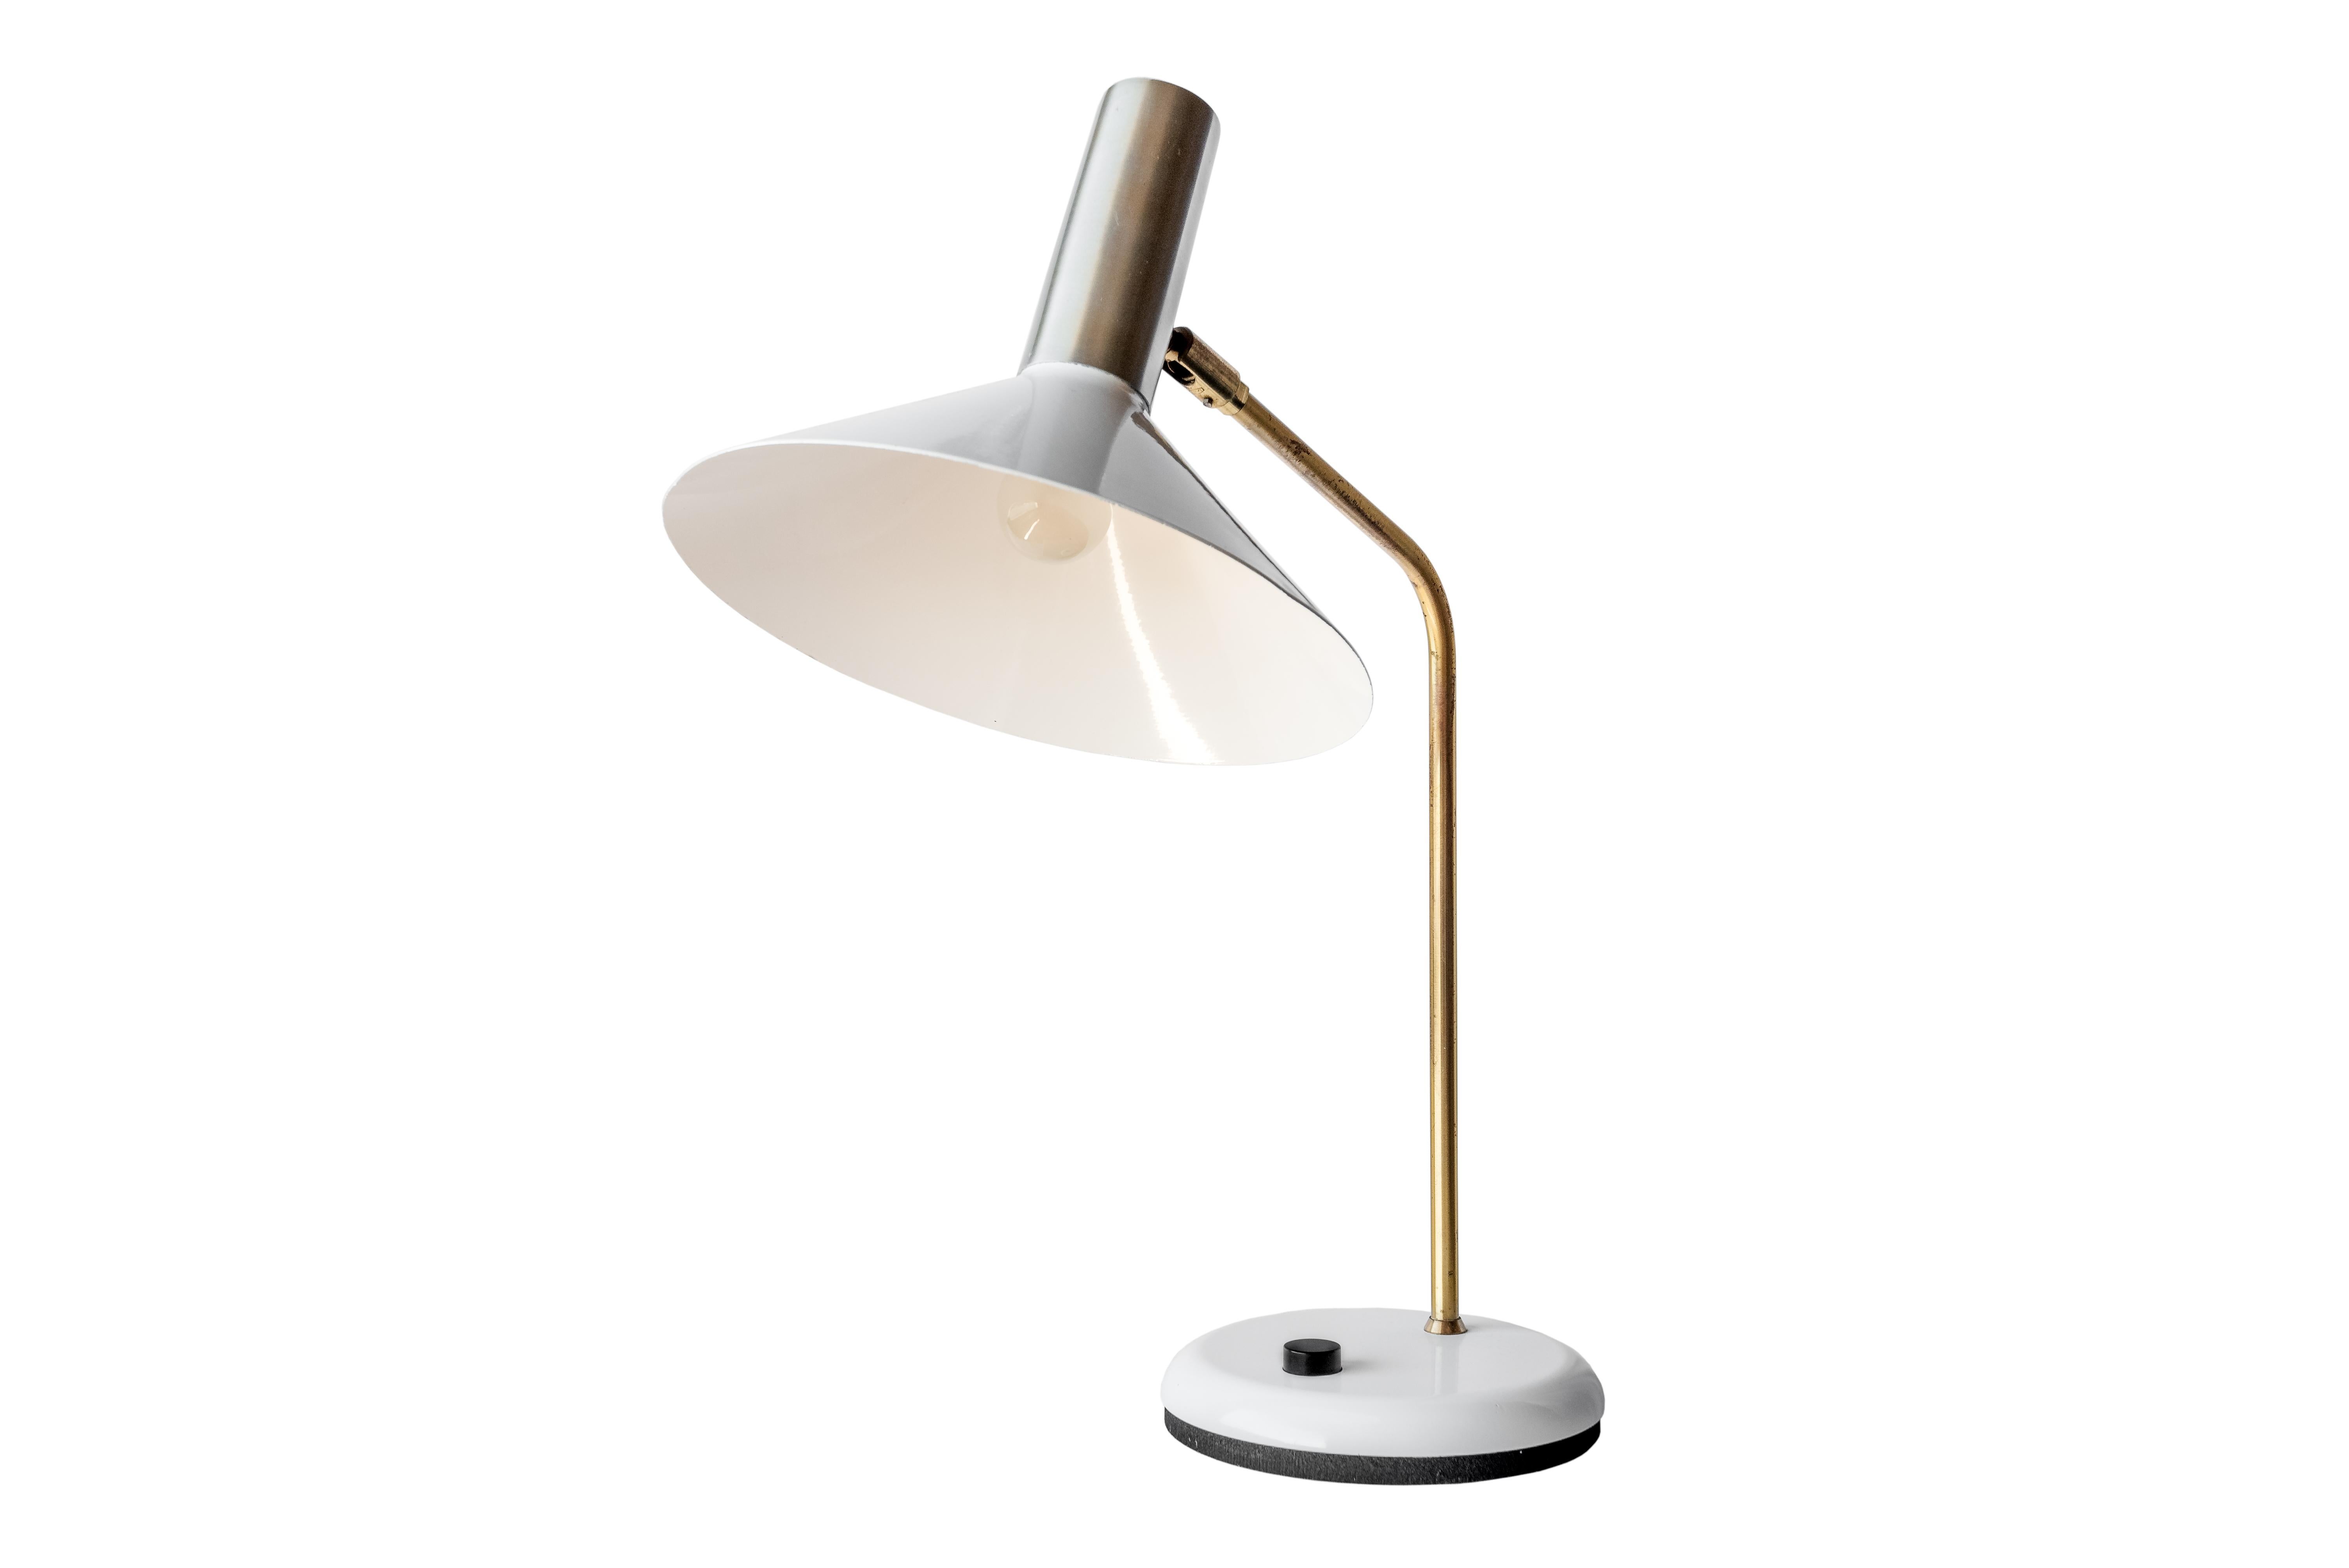 Rare and beautiful mid-century brass and painted steel desk lamp by Stilnovo, 1950.
Classic and elegant this Italian Stilnovo table lamp in white painted steel and is currently wired for the EU.

Photos by João Boullosa - Porto /